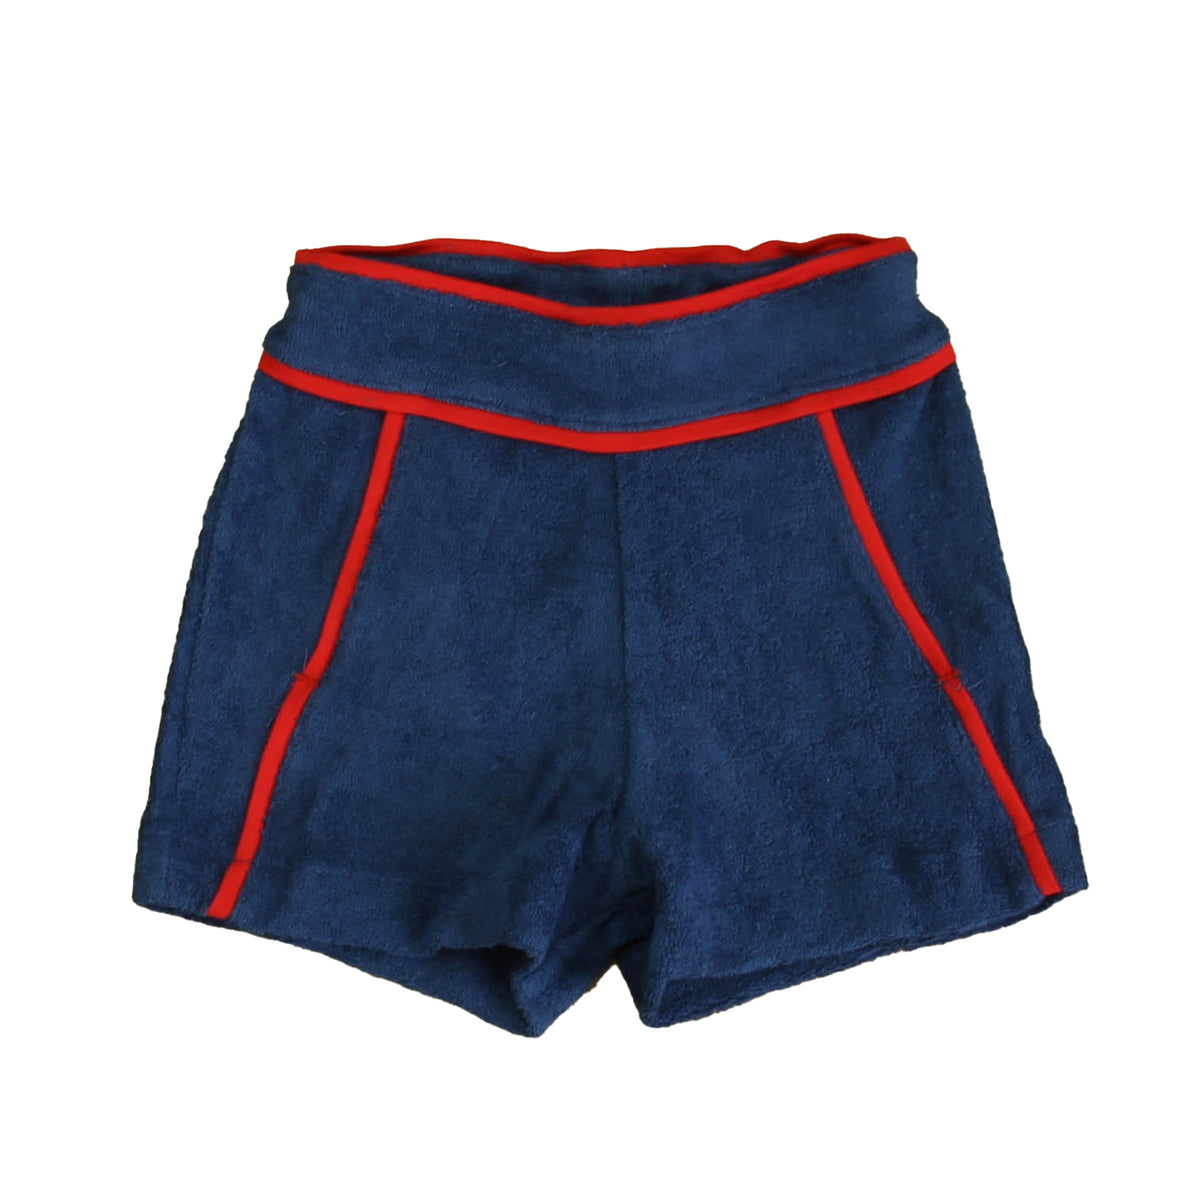 New with Tags: Bright Navy Shorts -- FINAL SALE